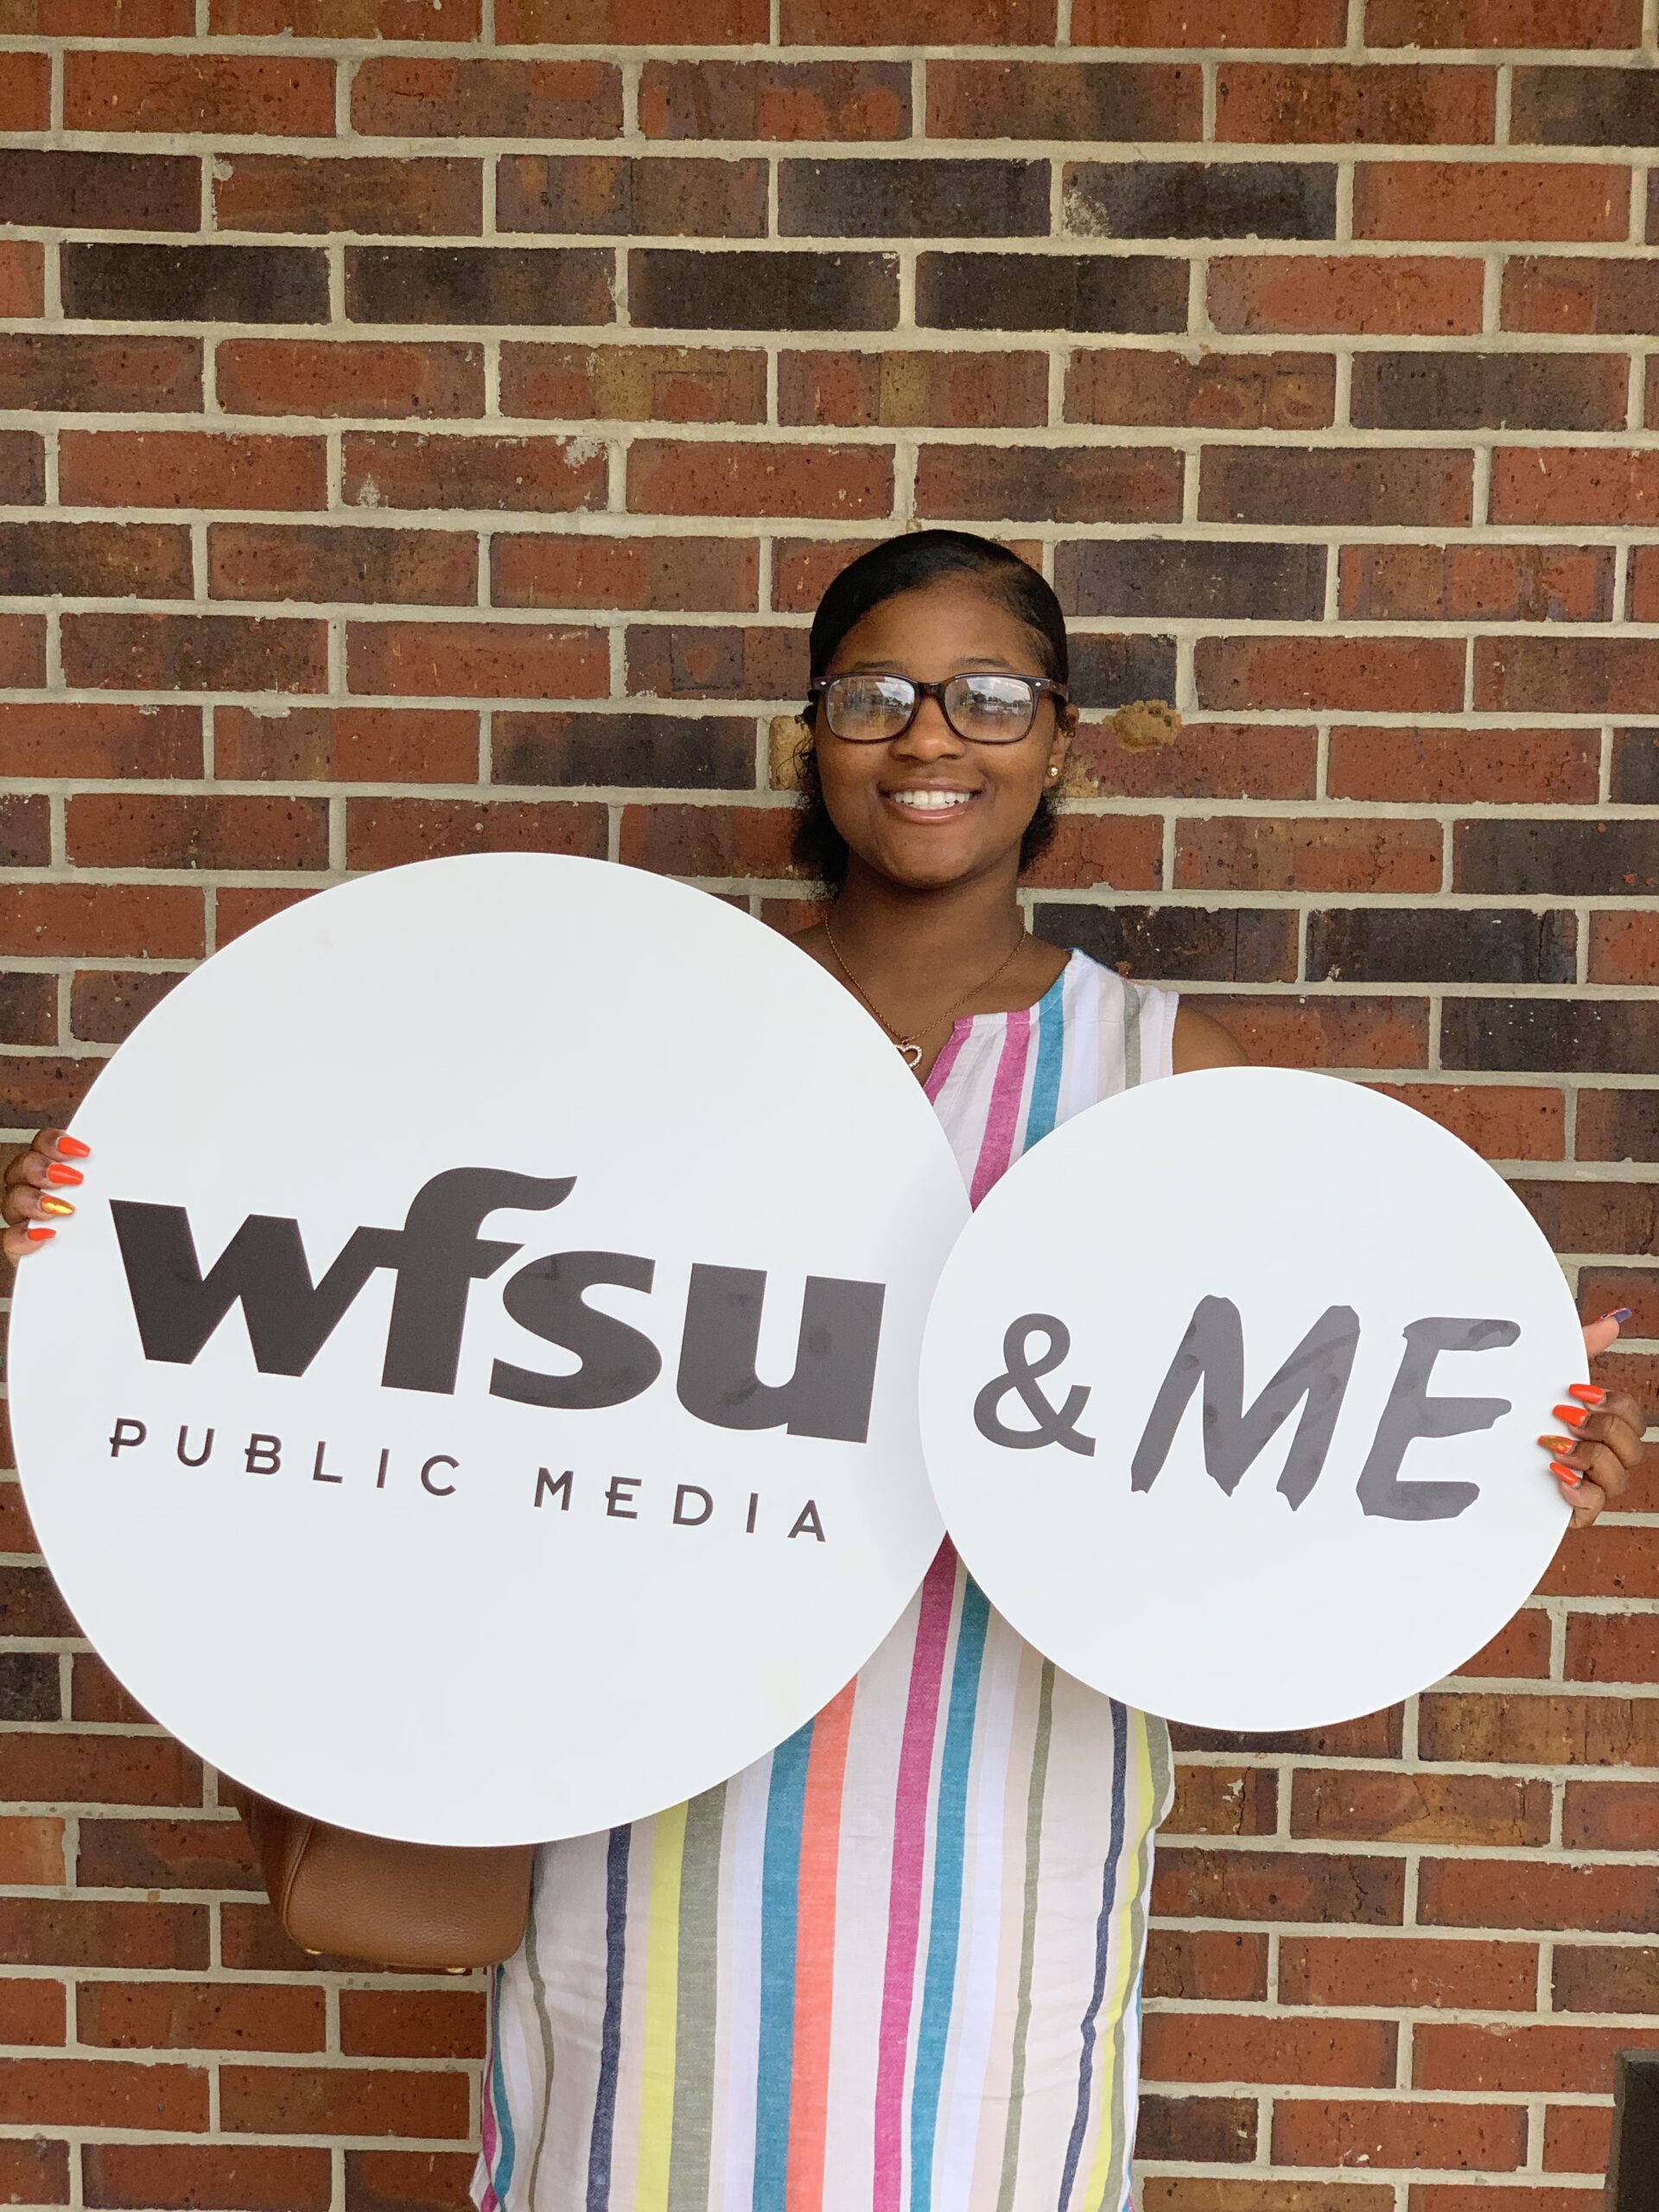 our intern sydnee holding a sign that says wfsu and me